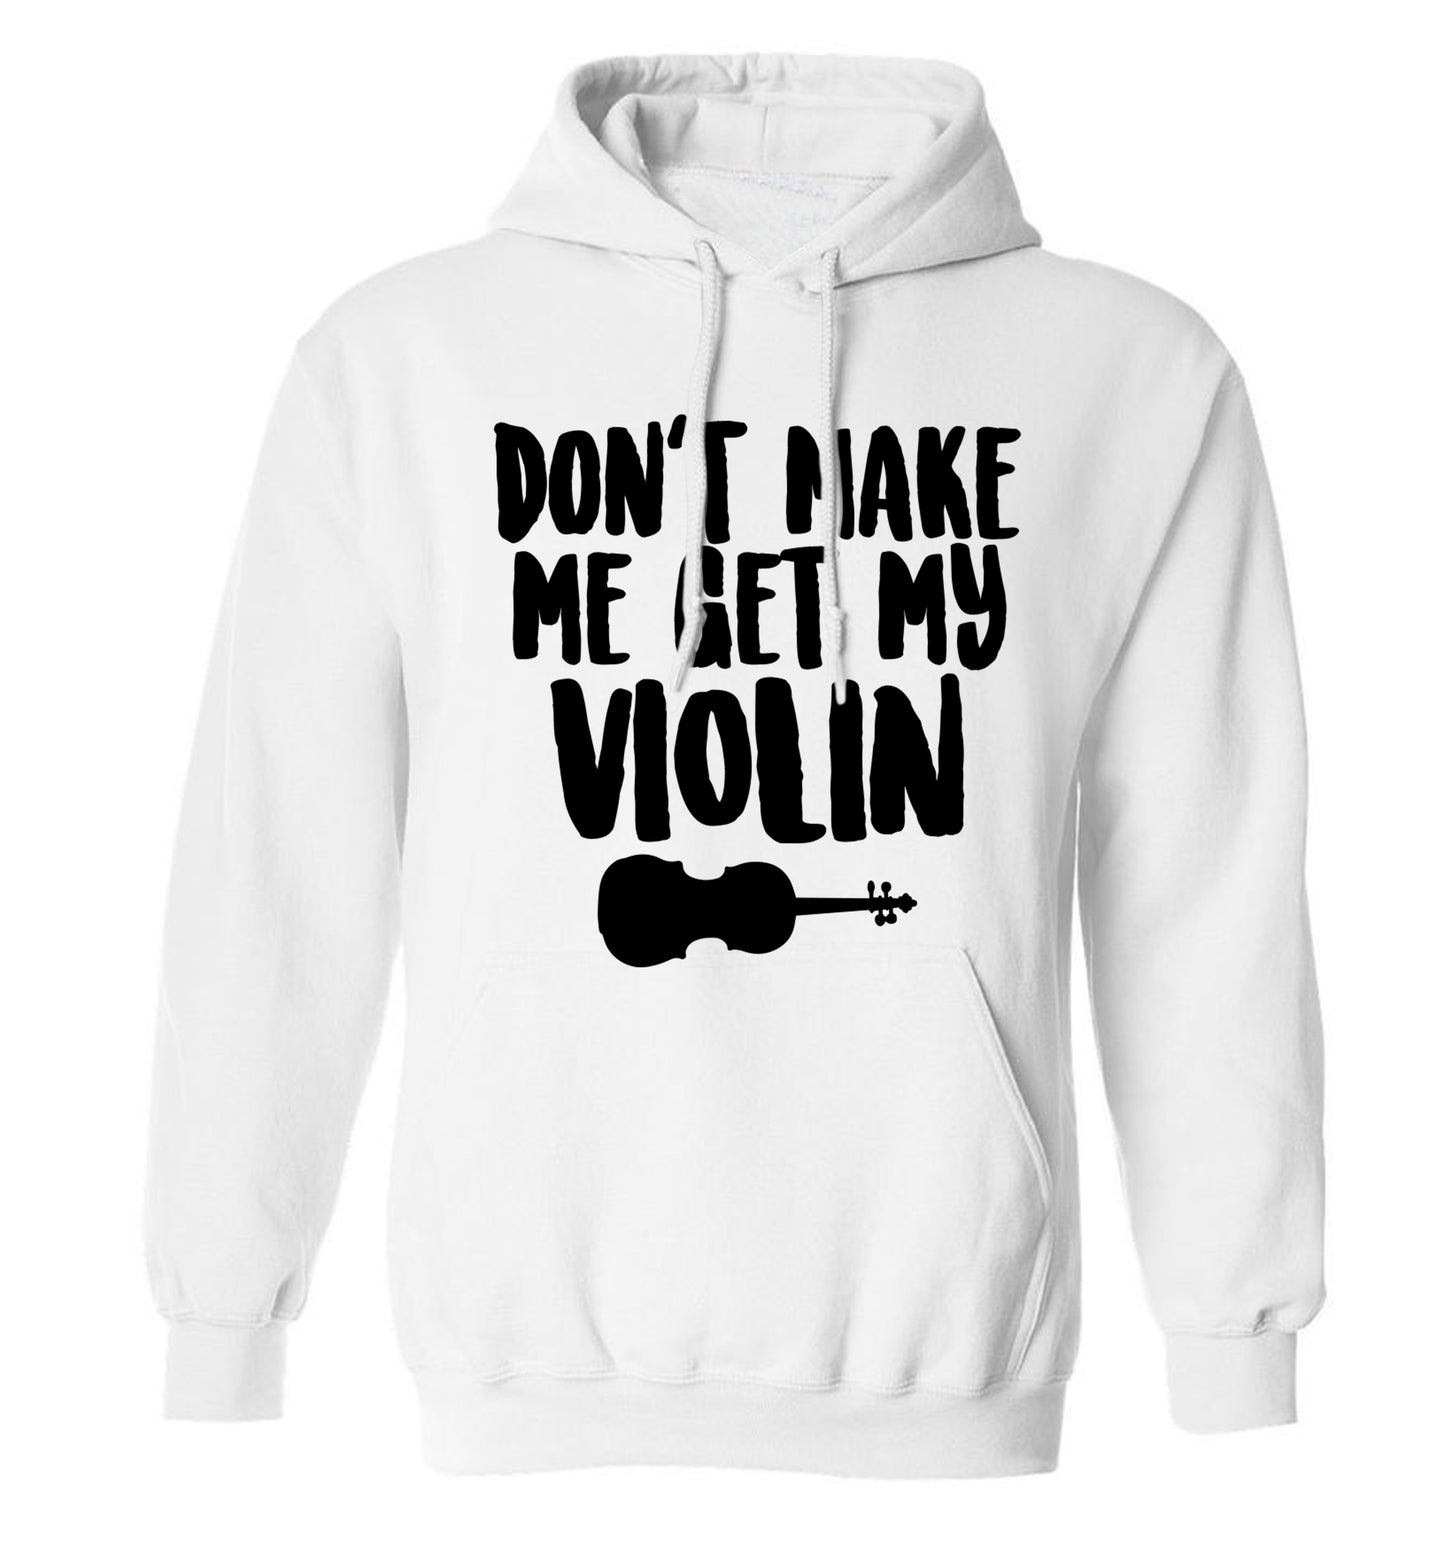 Don't make me get my violin adults unisex white hoodie 2XL